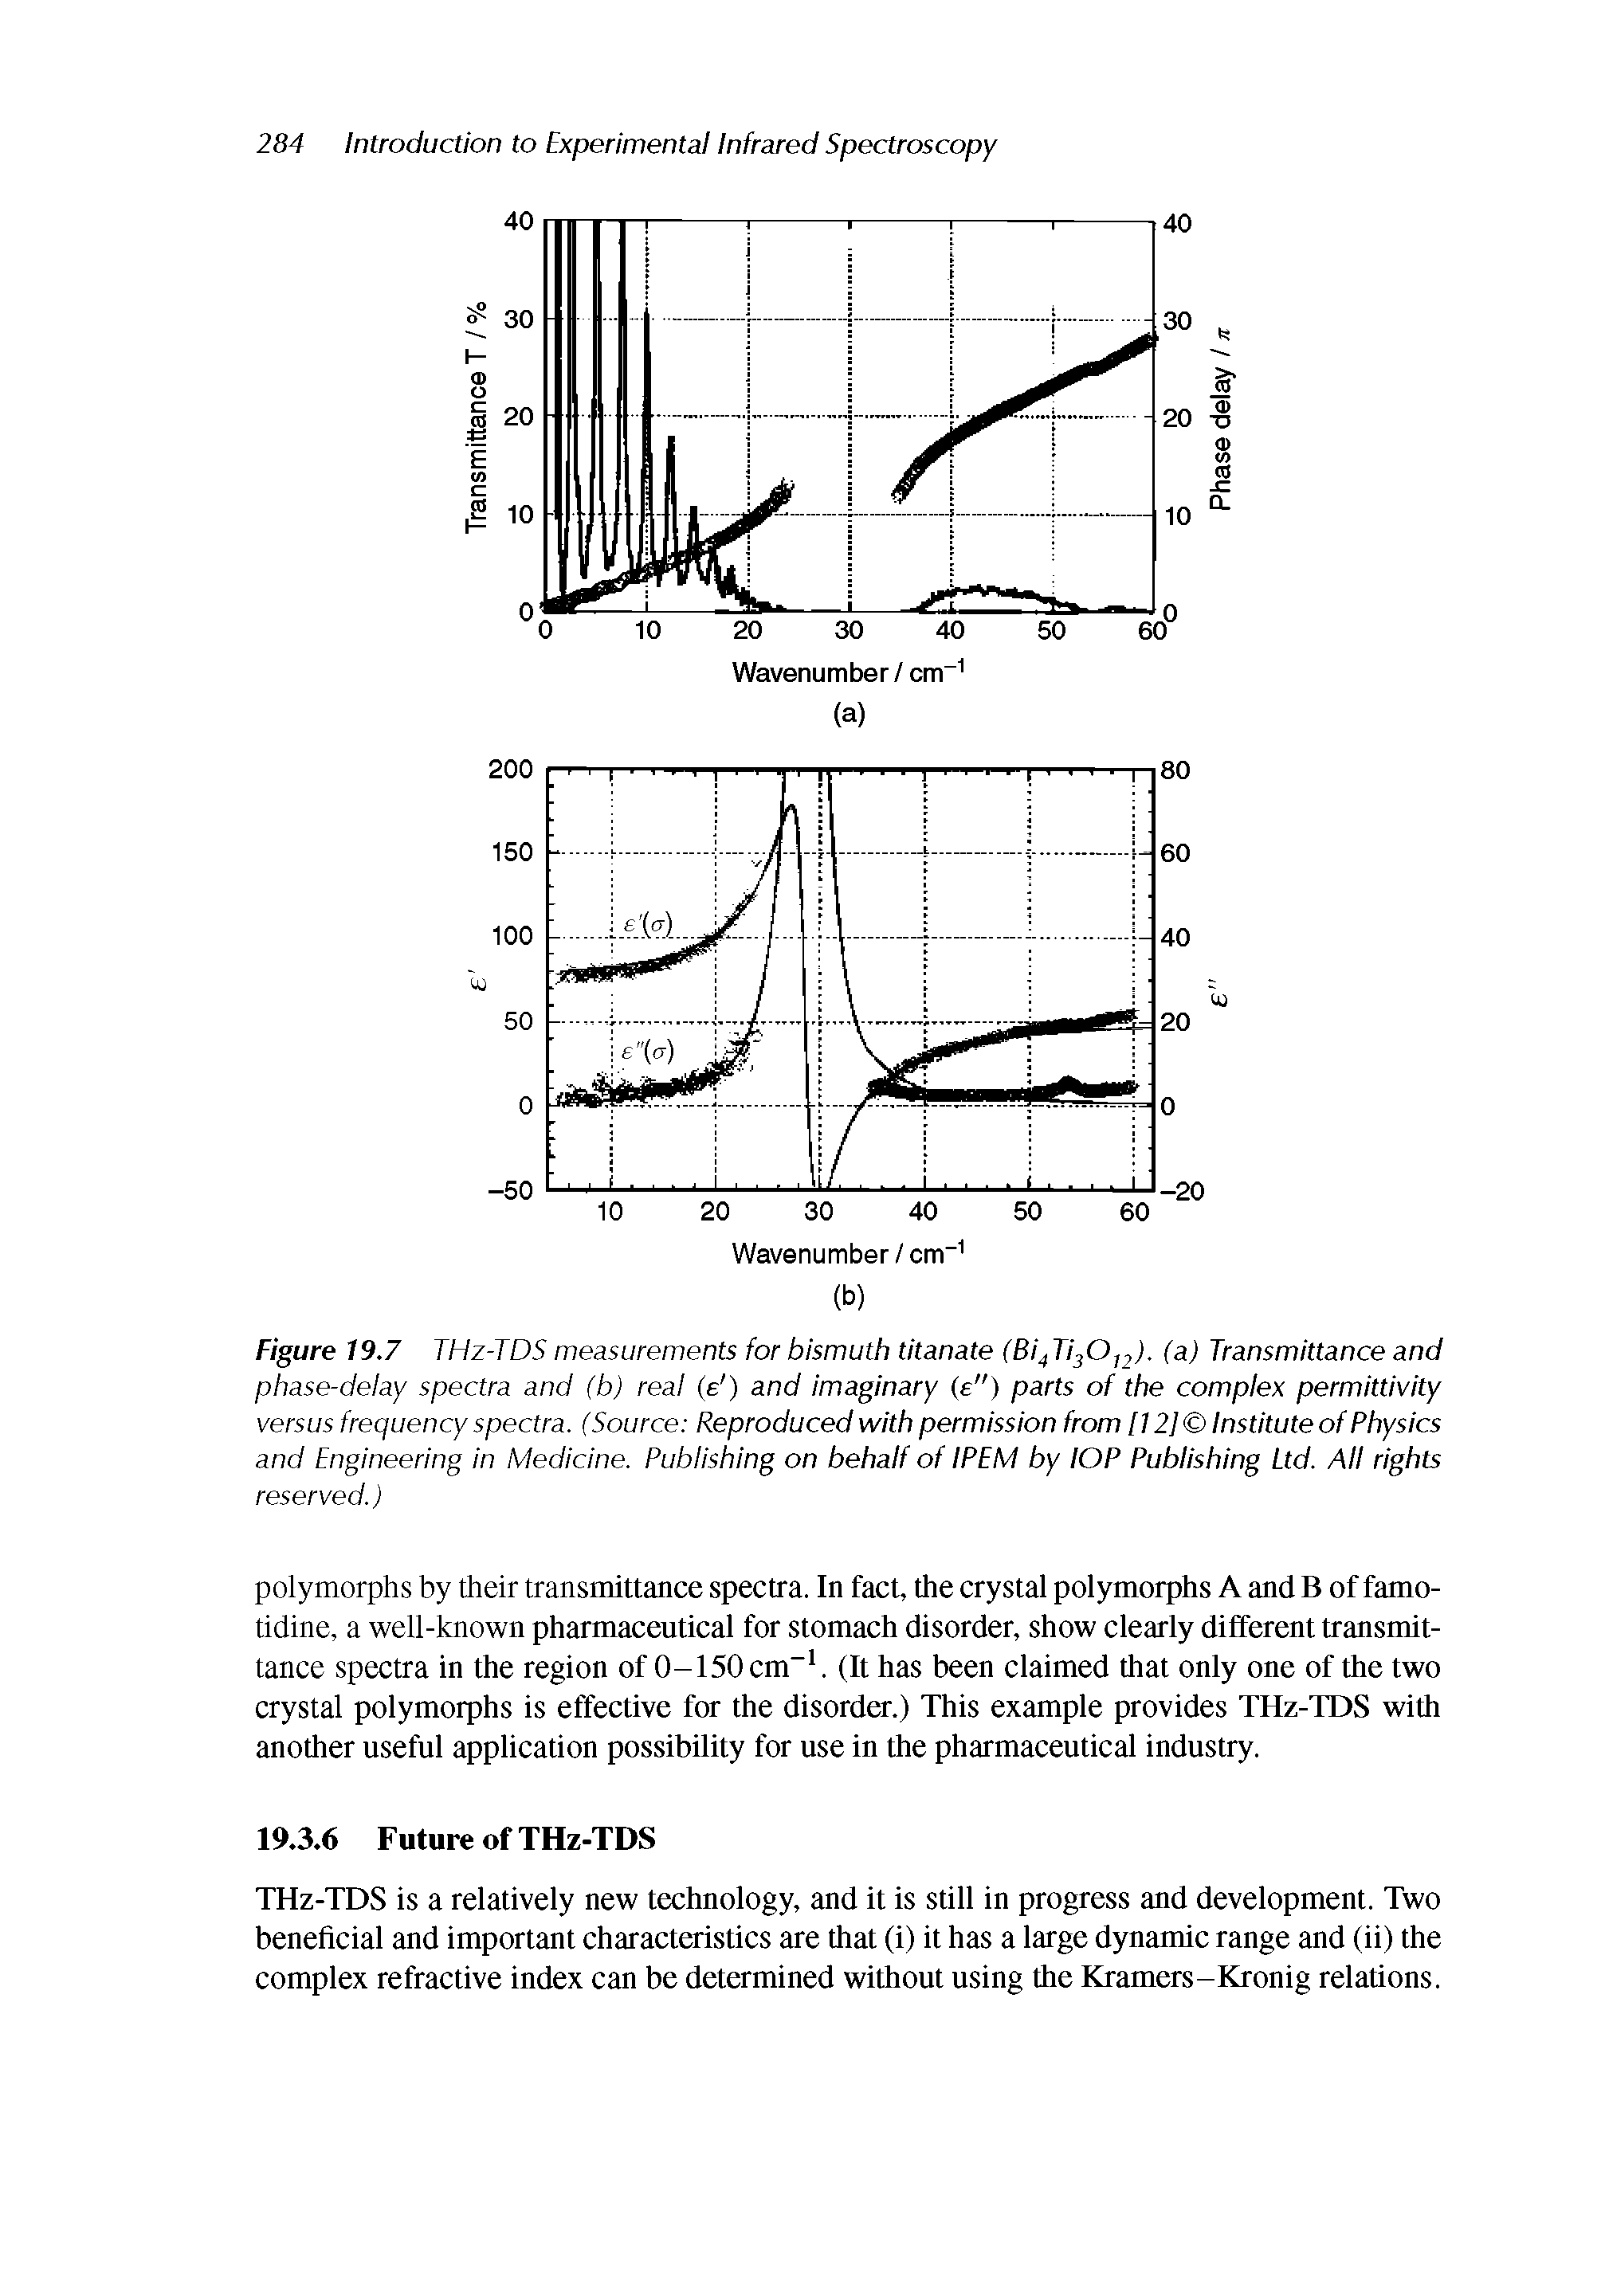 Figure 19.7 THz-TDS measurements for bismuth titanate (Bi Ti 0 2)- ( ) Transmittance and phase-delay spectra and (b) real (e ) and Imaginary (e") parts of the complex permittivity versus frequency spectra. (Source Reproduced with permission from [121 Institute of Physics and Engineering in Medicine. Publishing on behalf of IPEM by lOP Publishing Ltd. All rights...